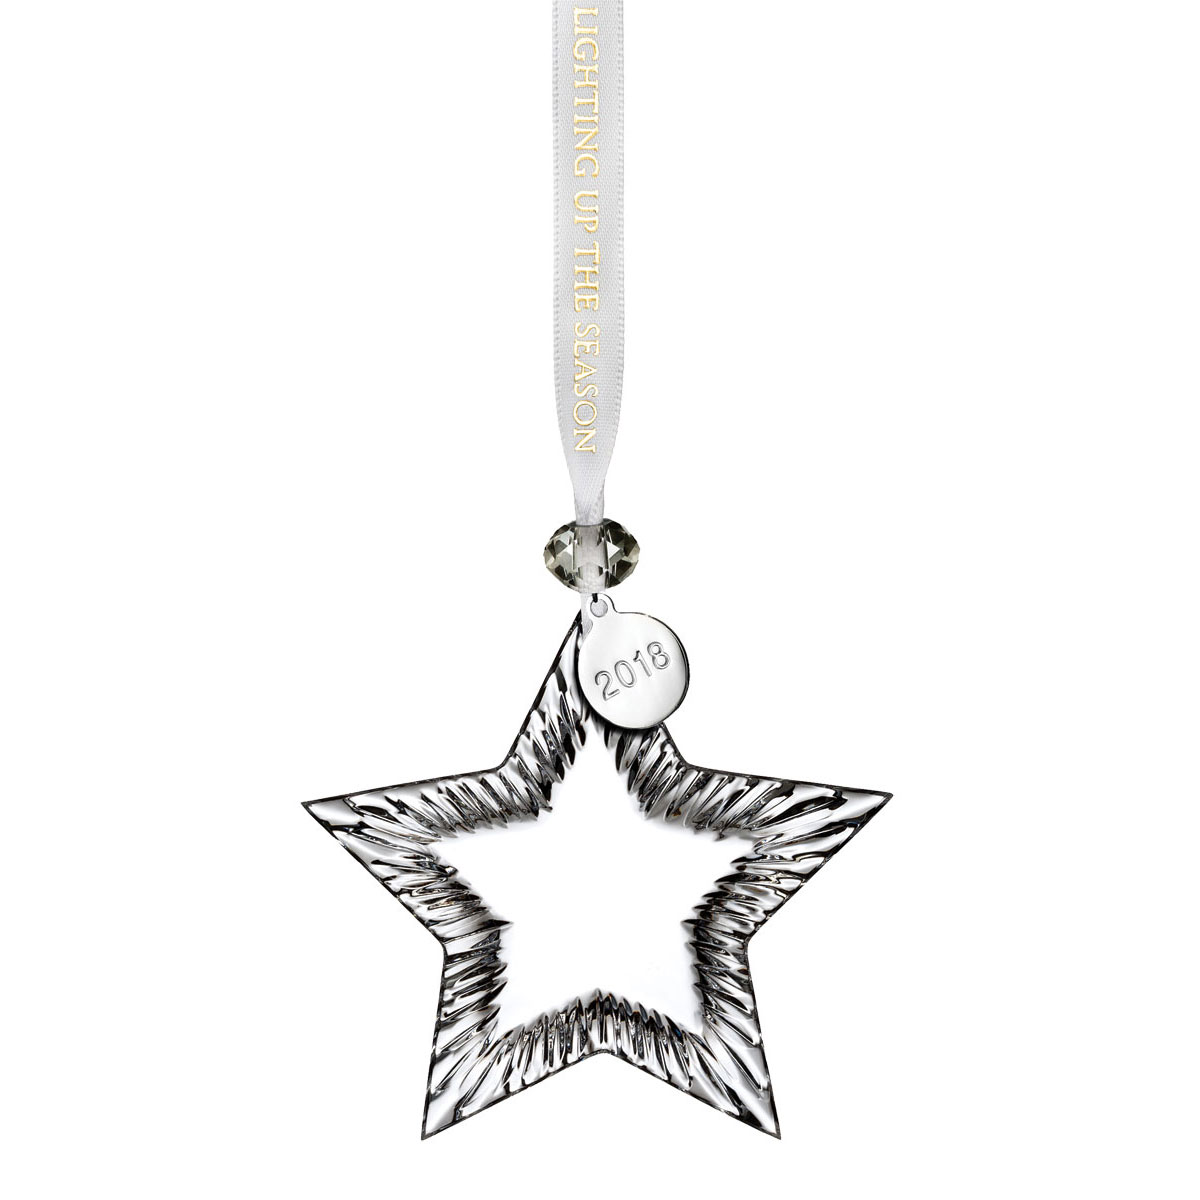 Waterford Crystal 2018 Star Ornament